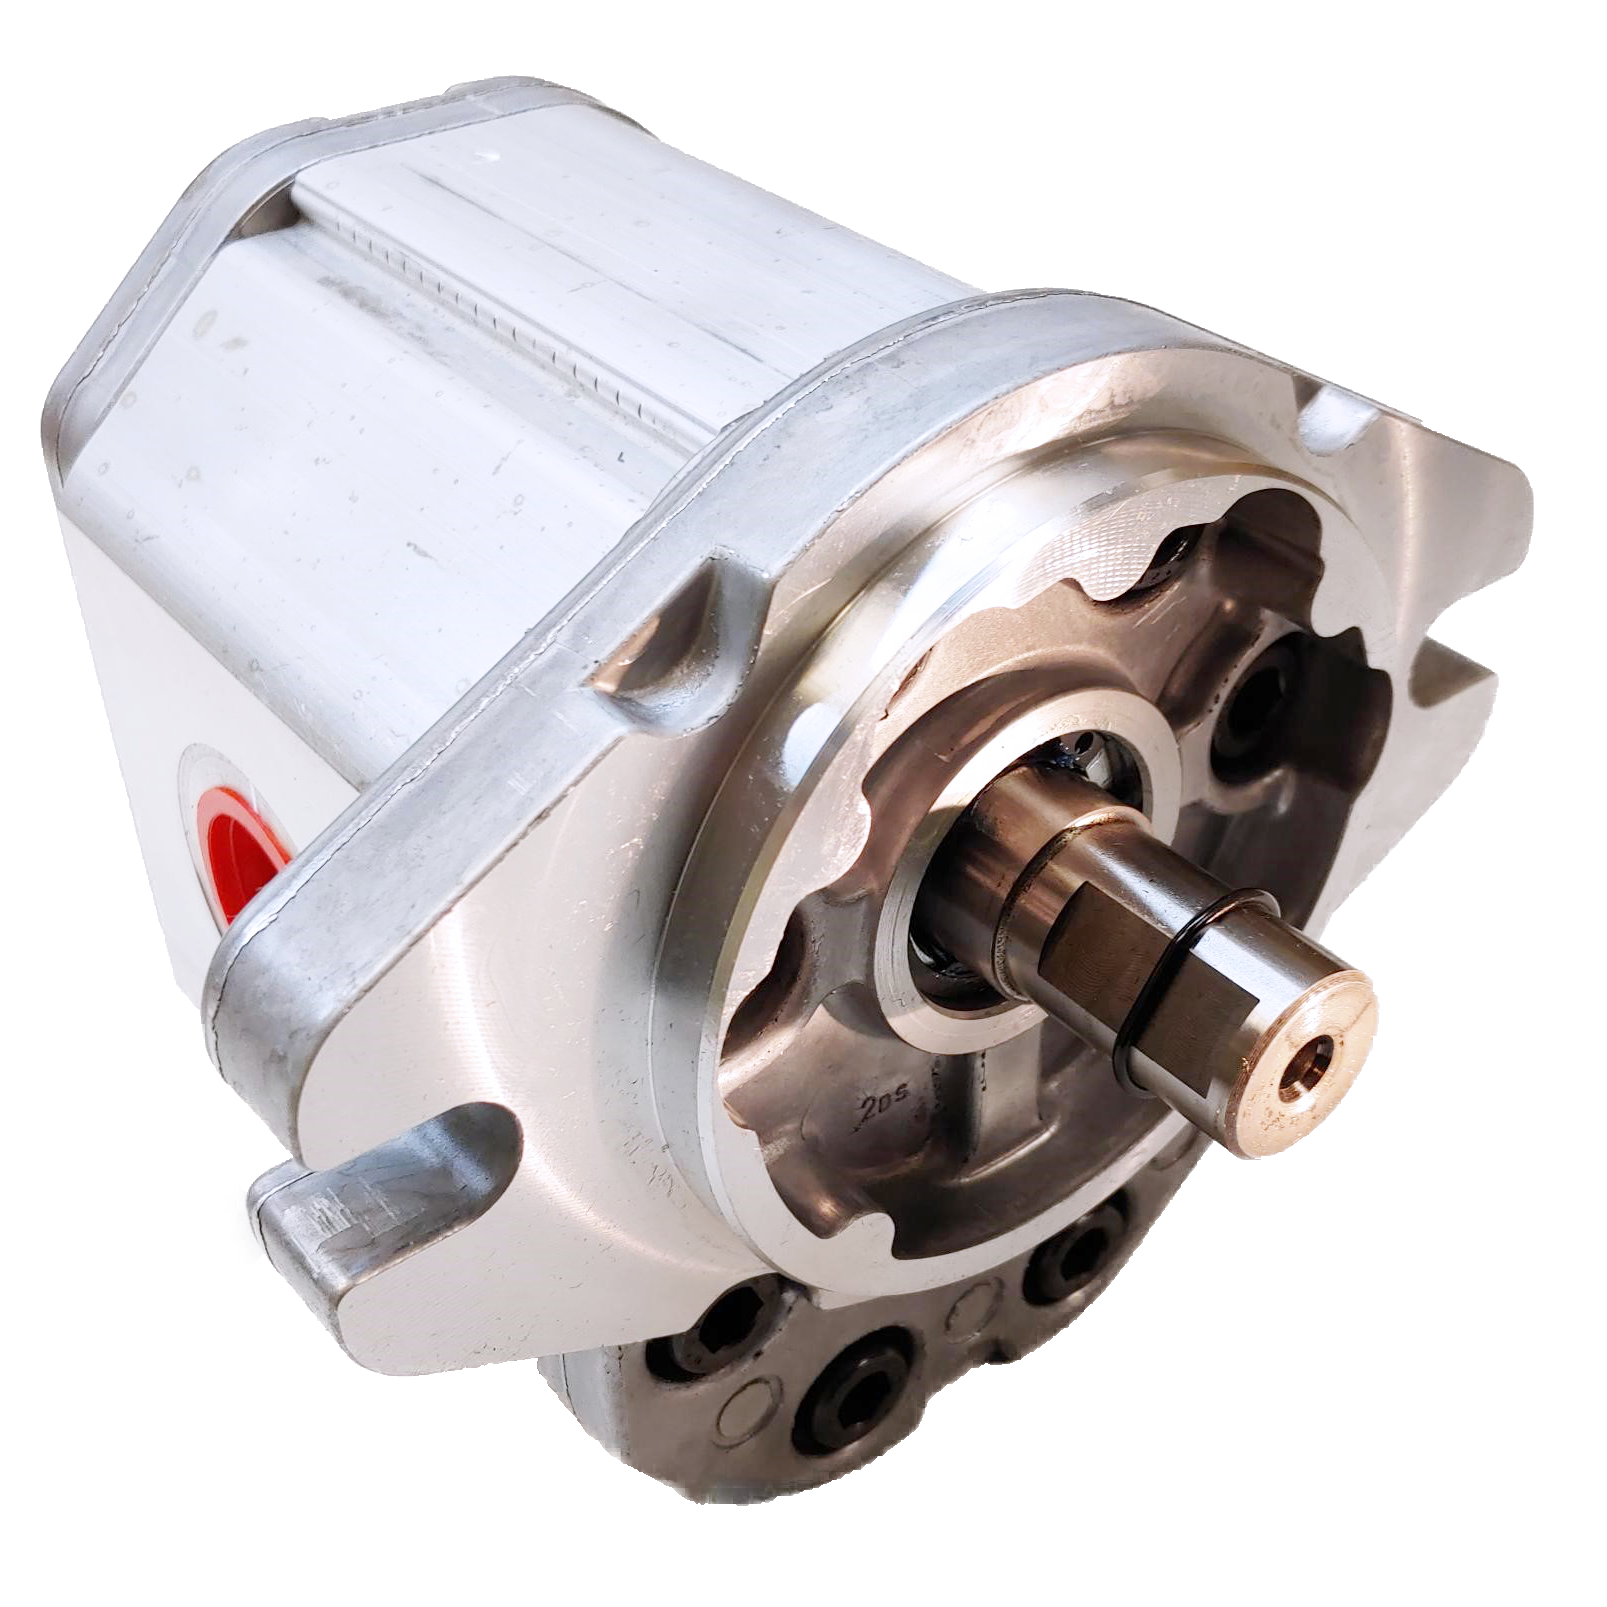 ALM3A-R-66-E4 : Marzocchi Gear Motor, Bidirectional, 44cc, 3045psi rated, 2800RPM, 1" Code 61 ports, 5/8" Bore x 5/32" Keyed Shaft